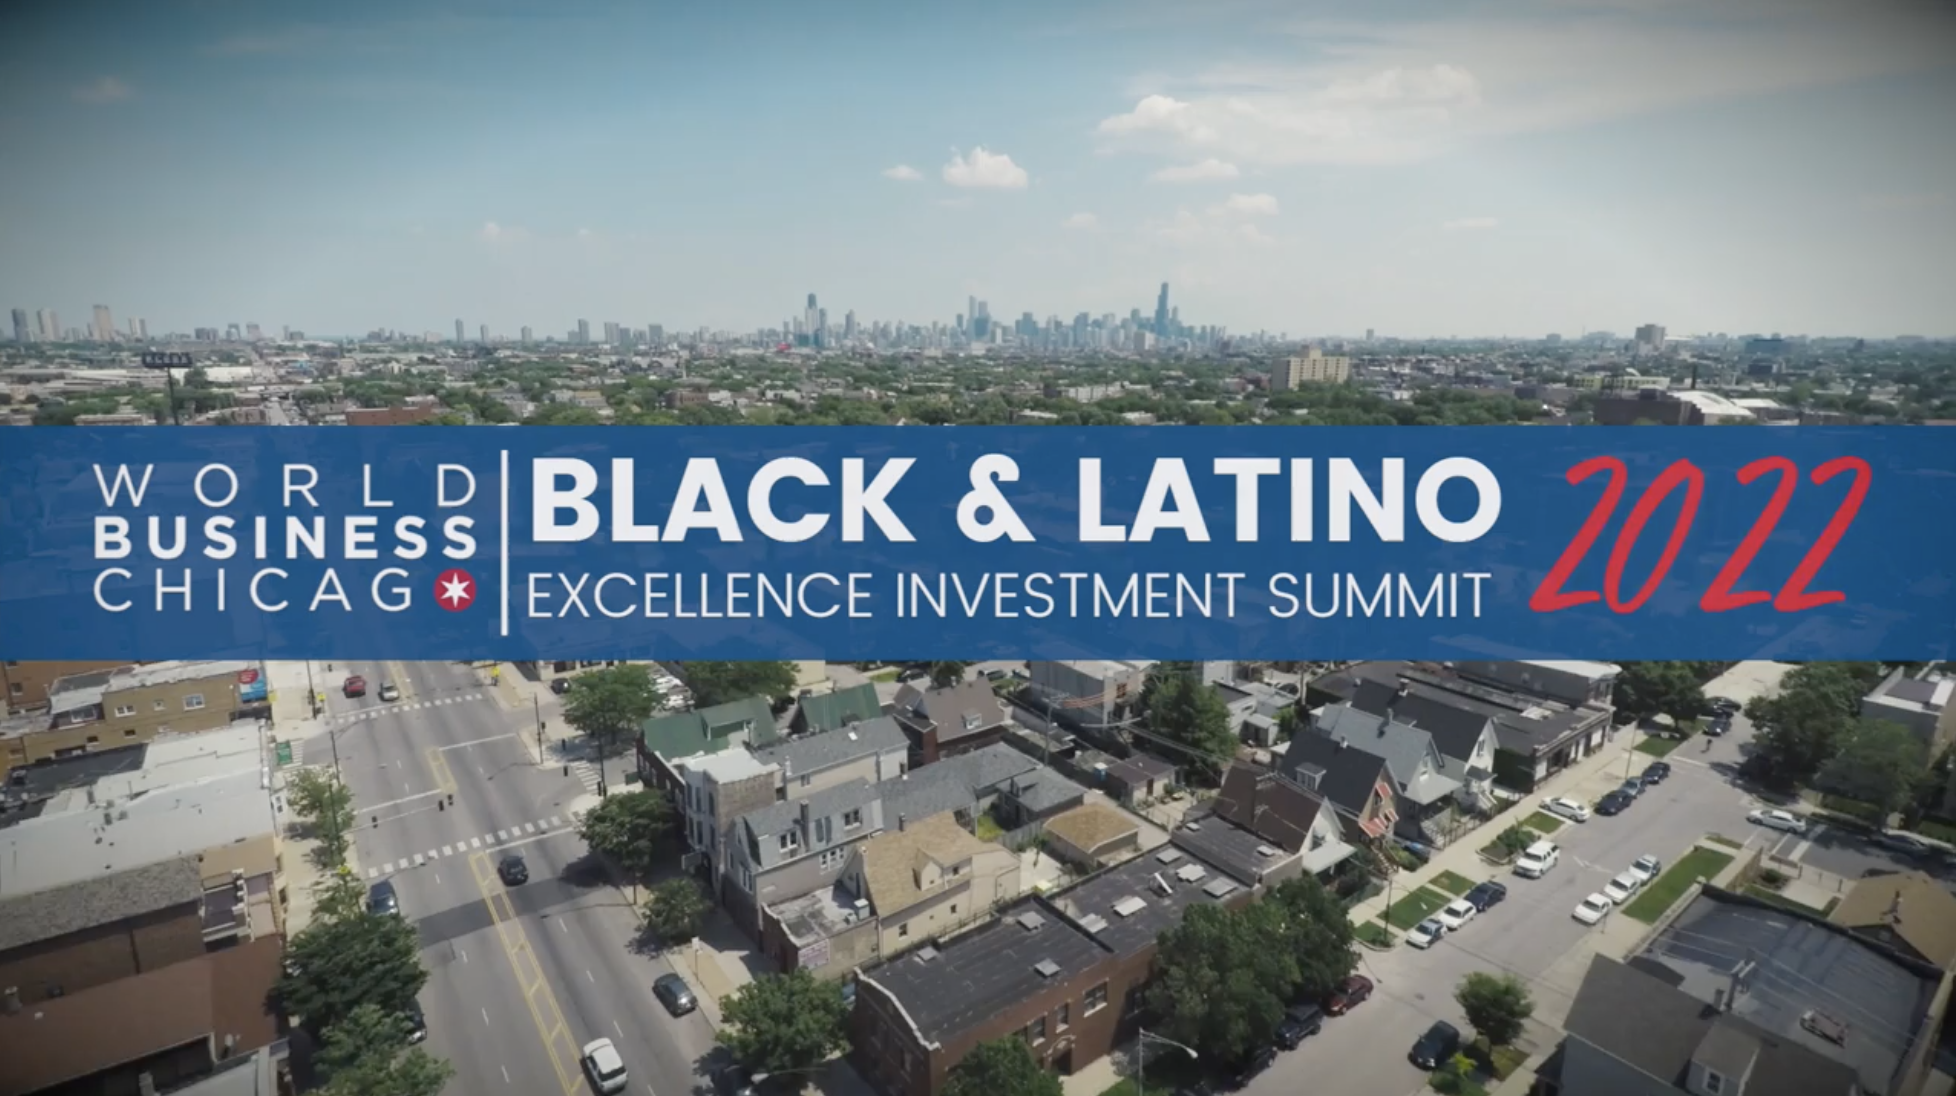 Black & Latino Excellence Investment Summit